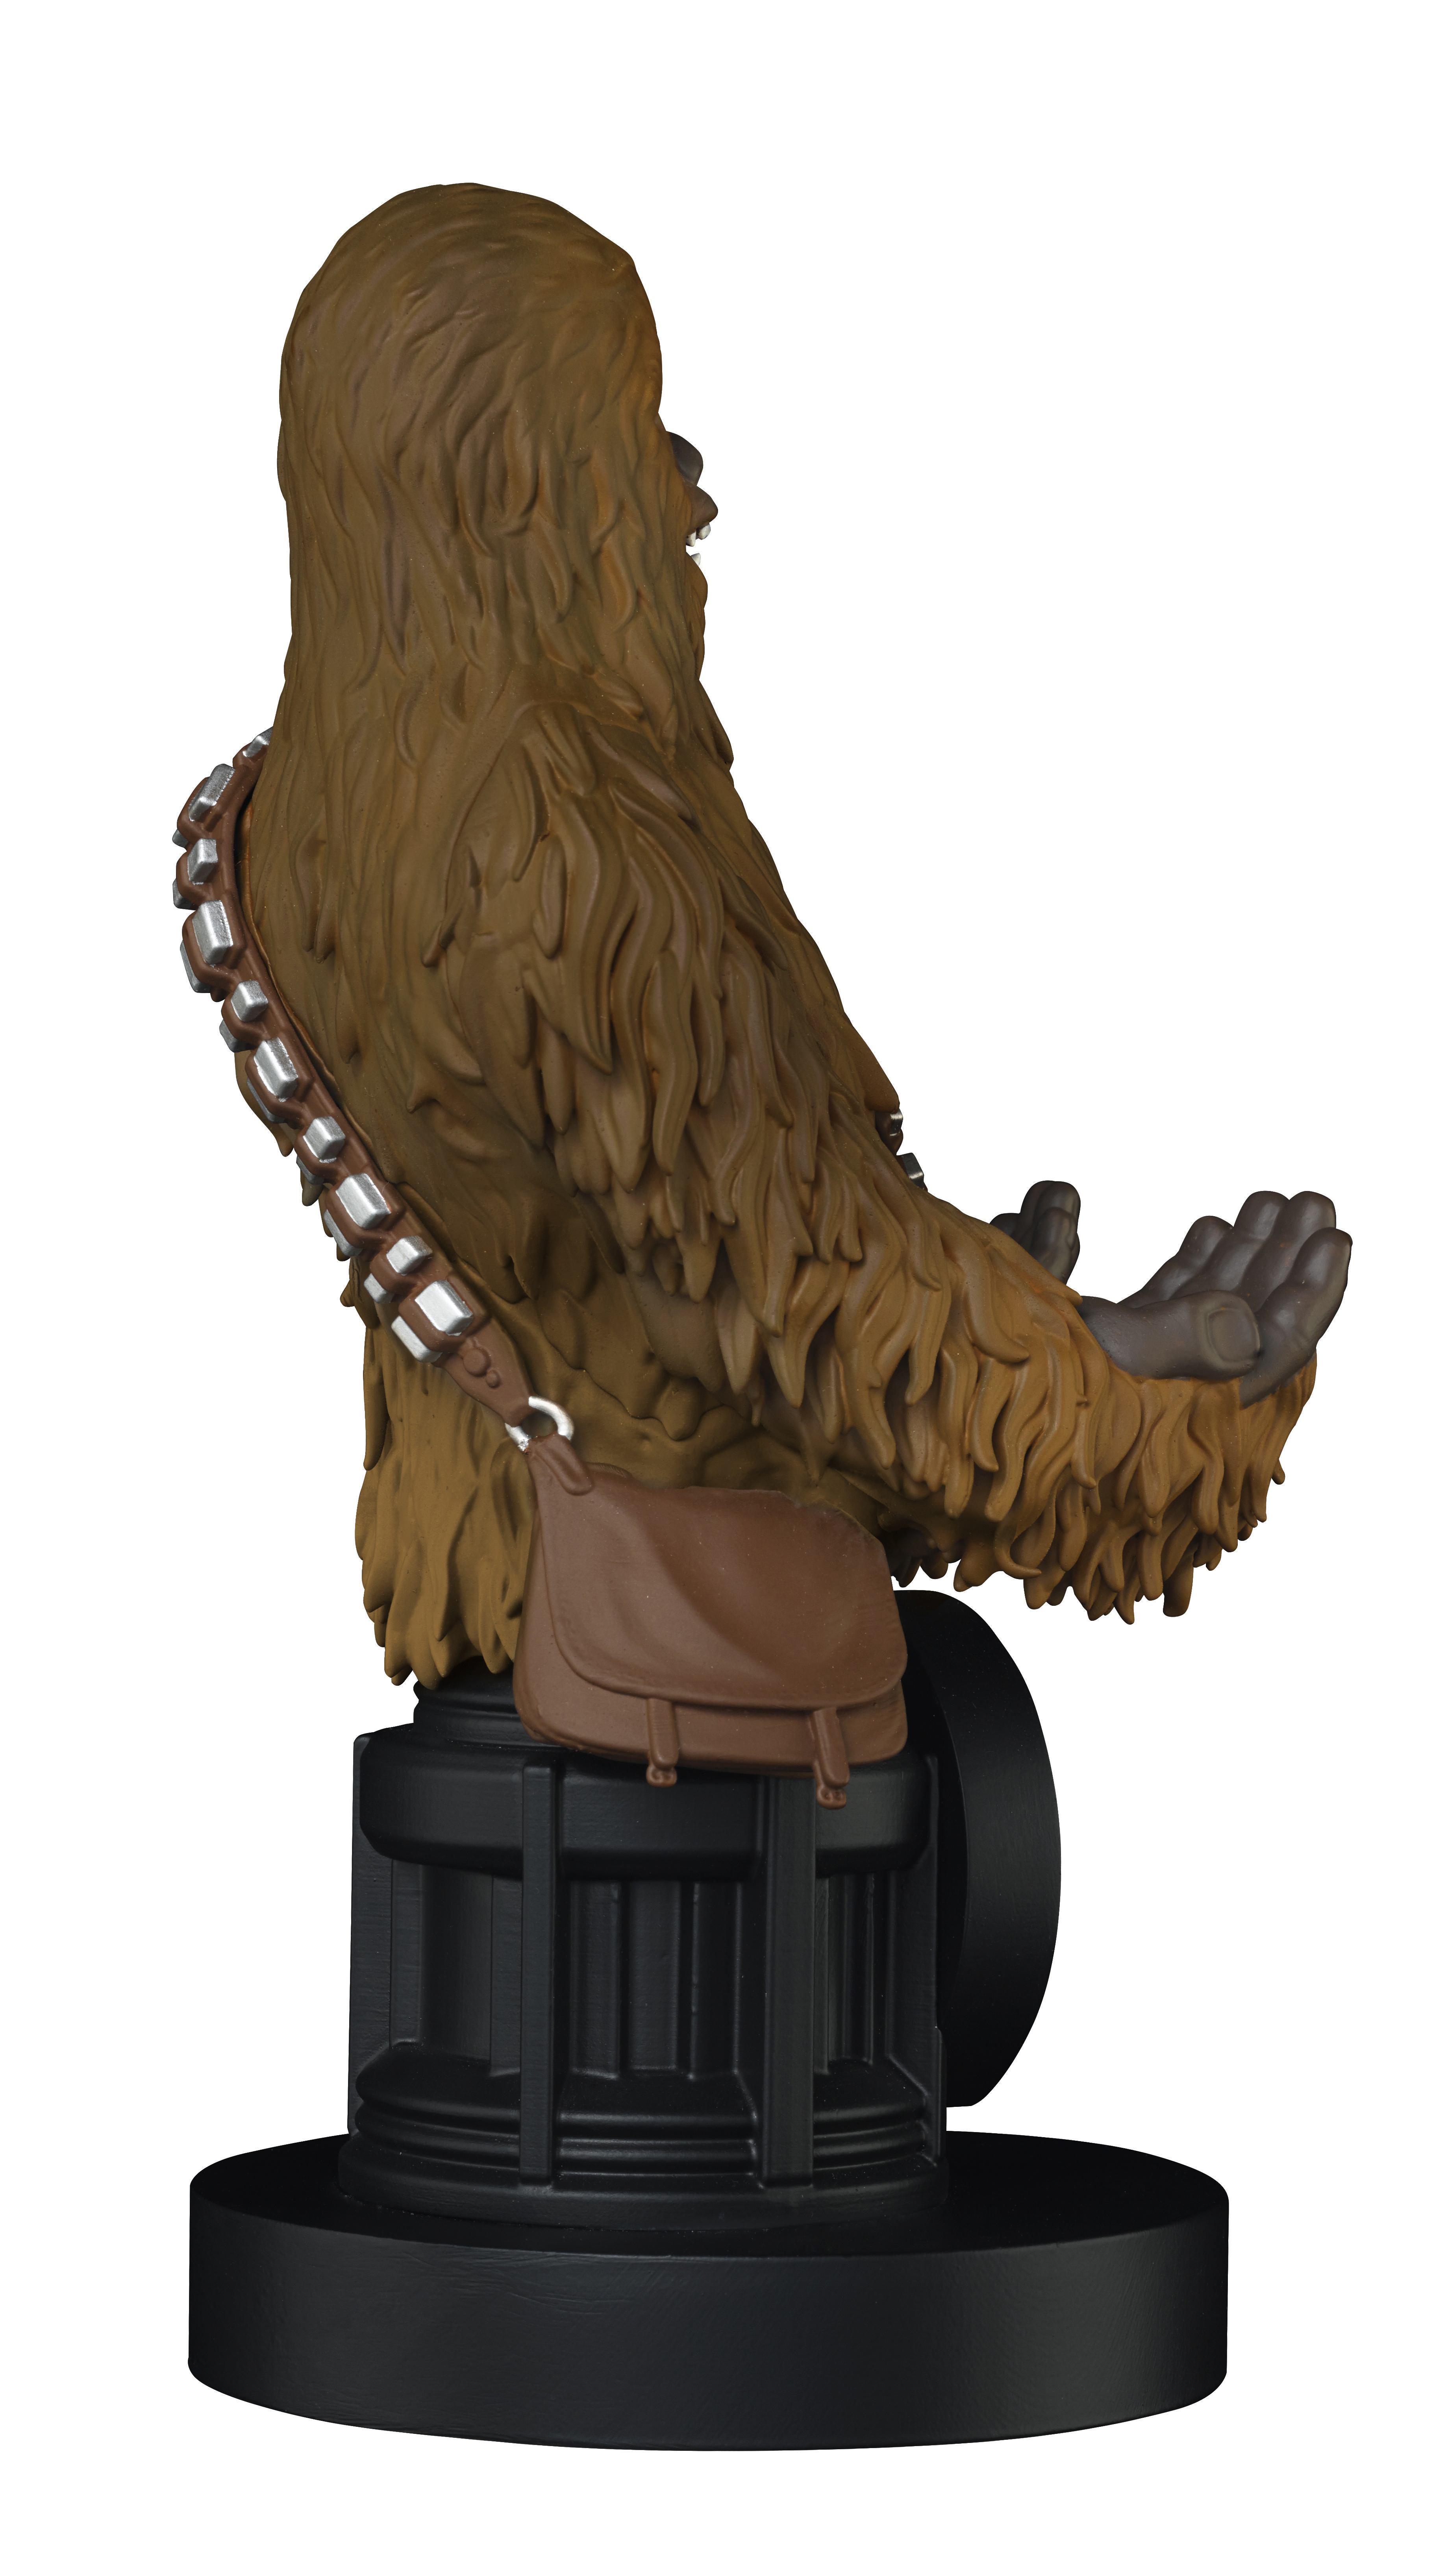 Phonehalterung oder Chewbacca Controller- Cable GUYS CABLE Guy